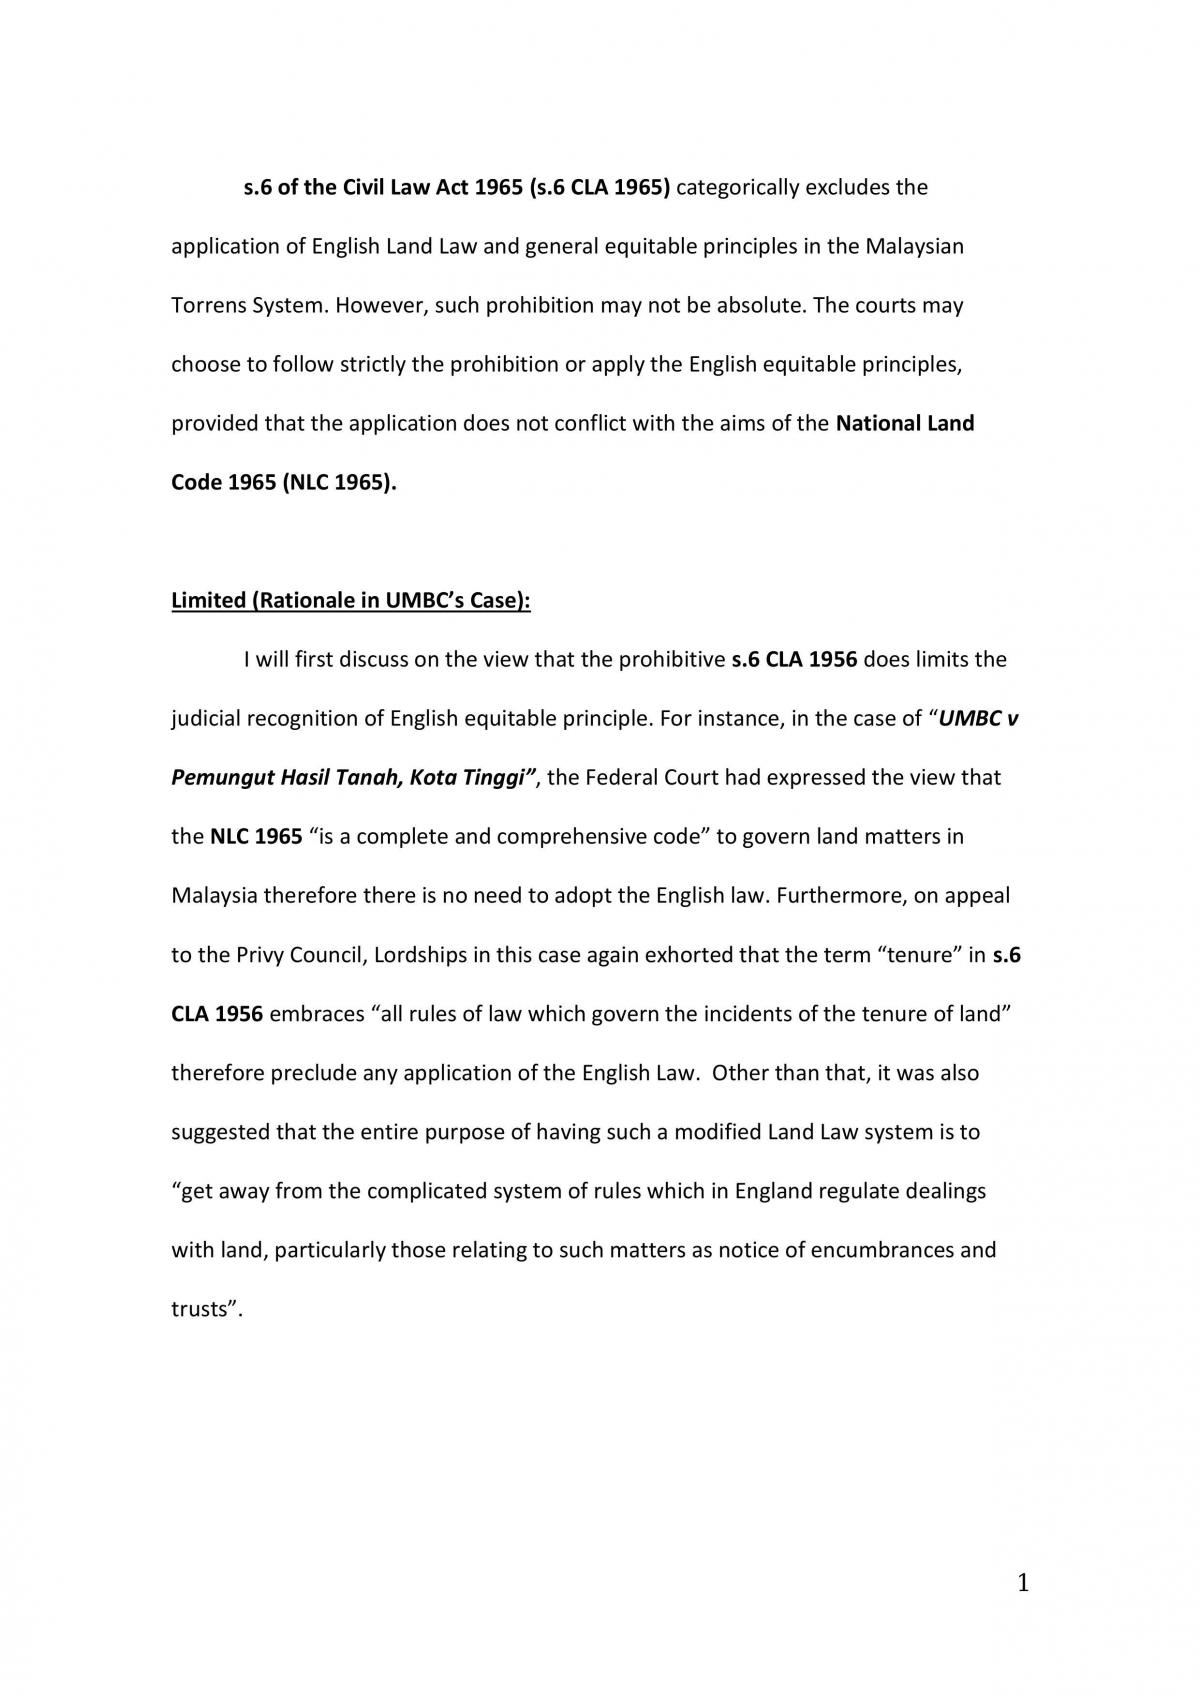 Land Law III Written Assignment - Page 1